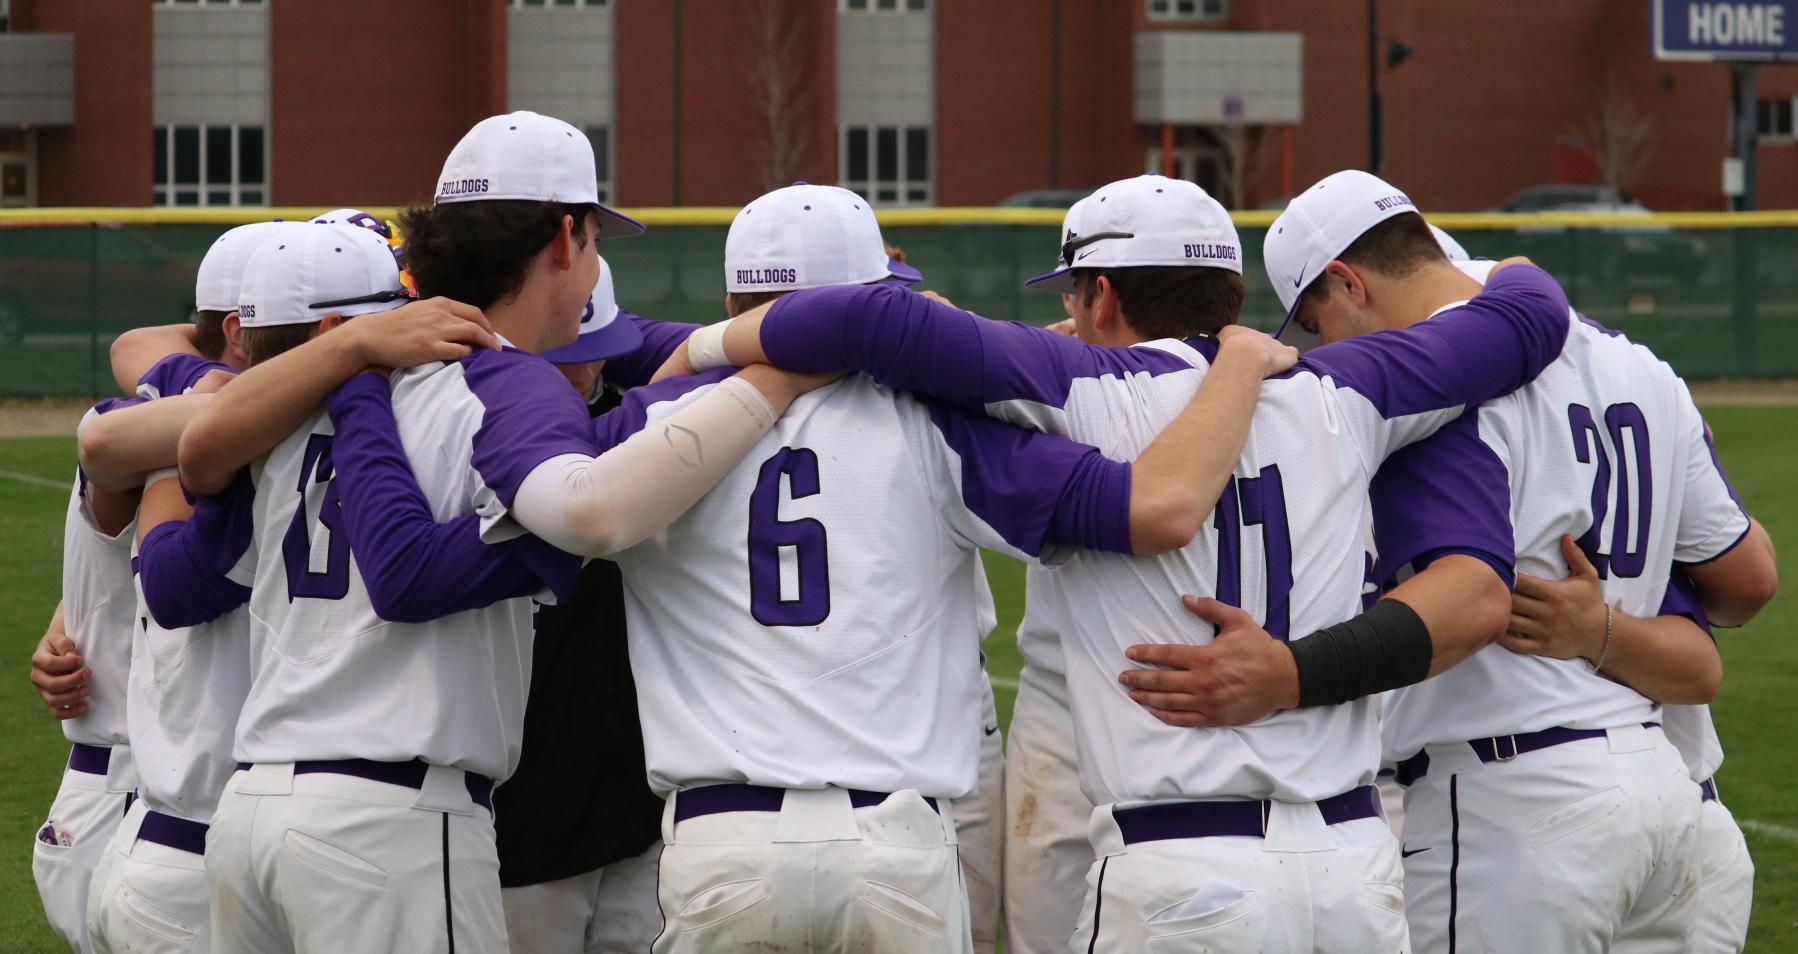 Baseball pulls off third straight win, takes down Tri-West in rain-shortened game, 7-4